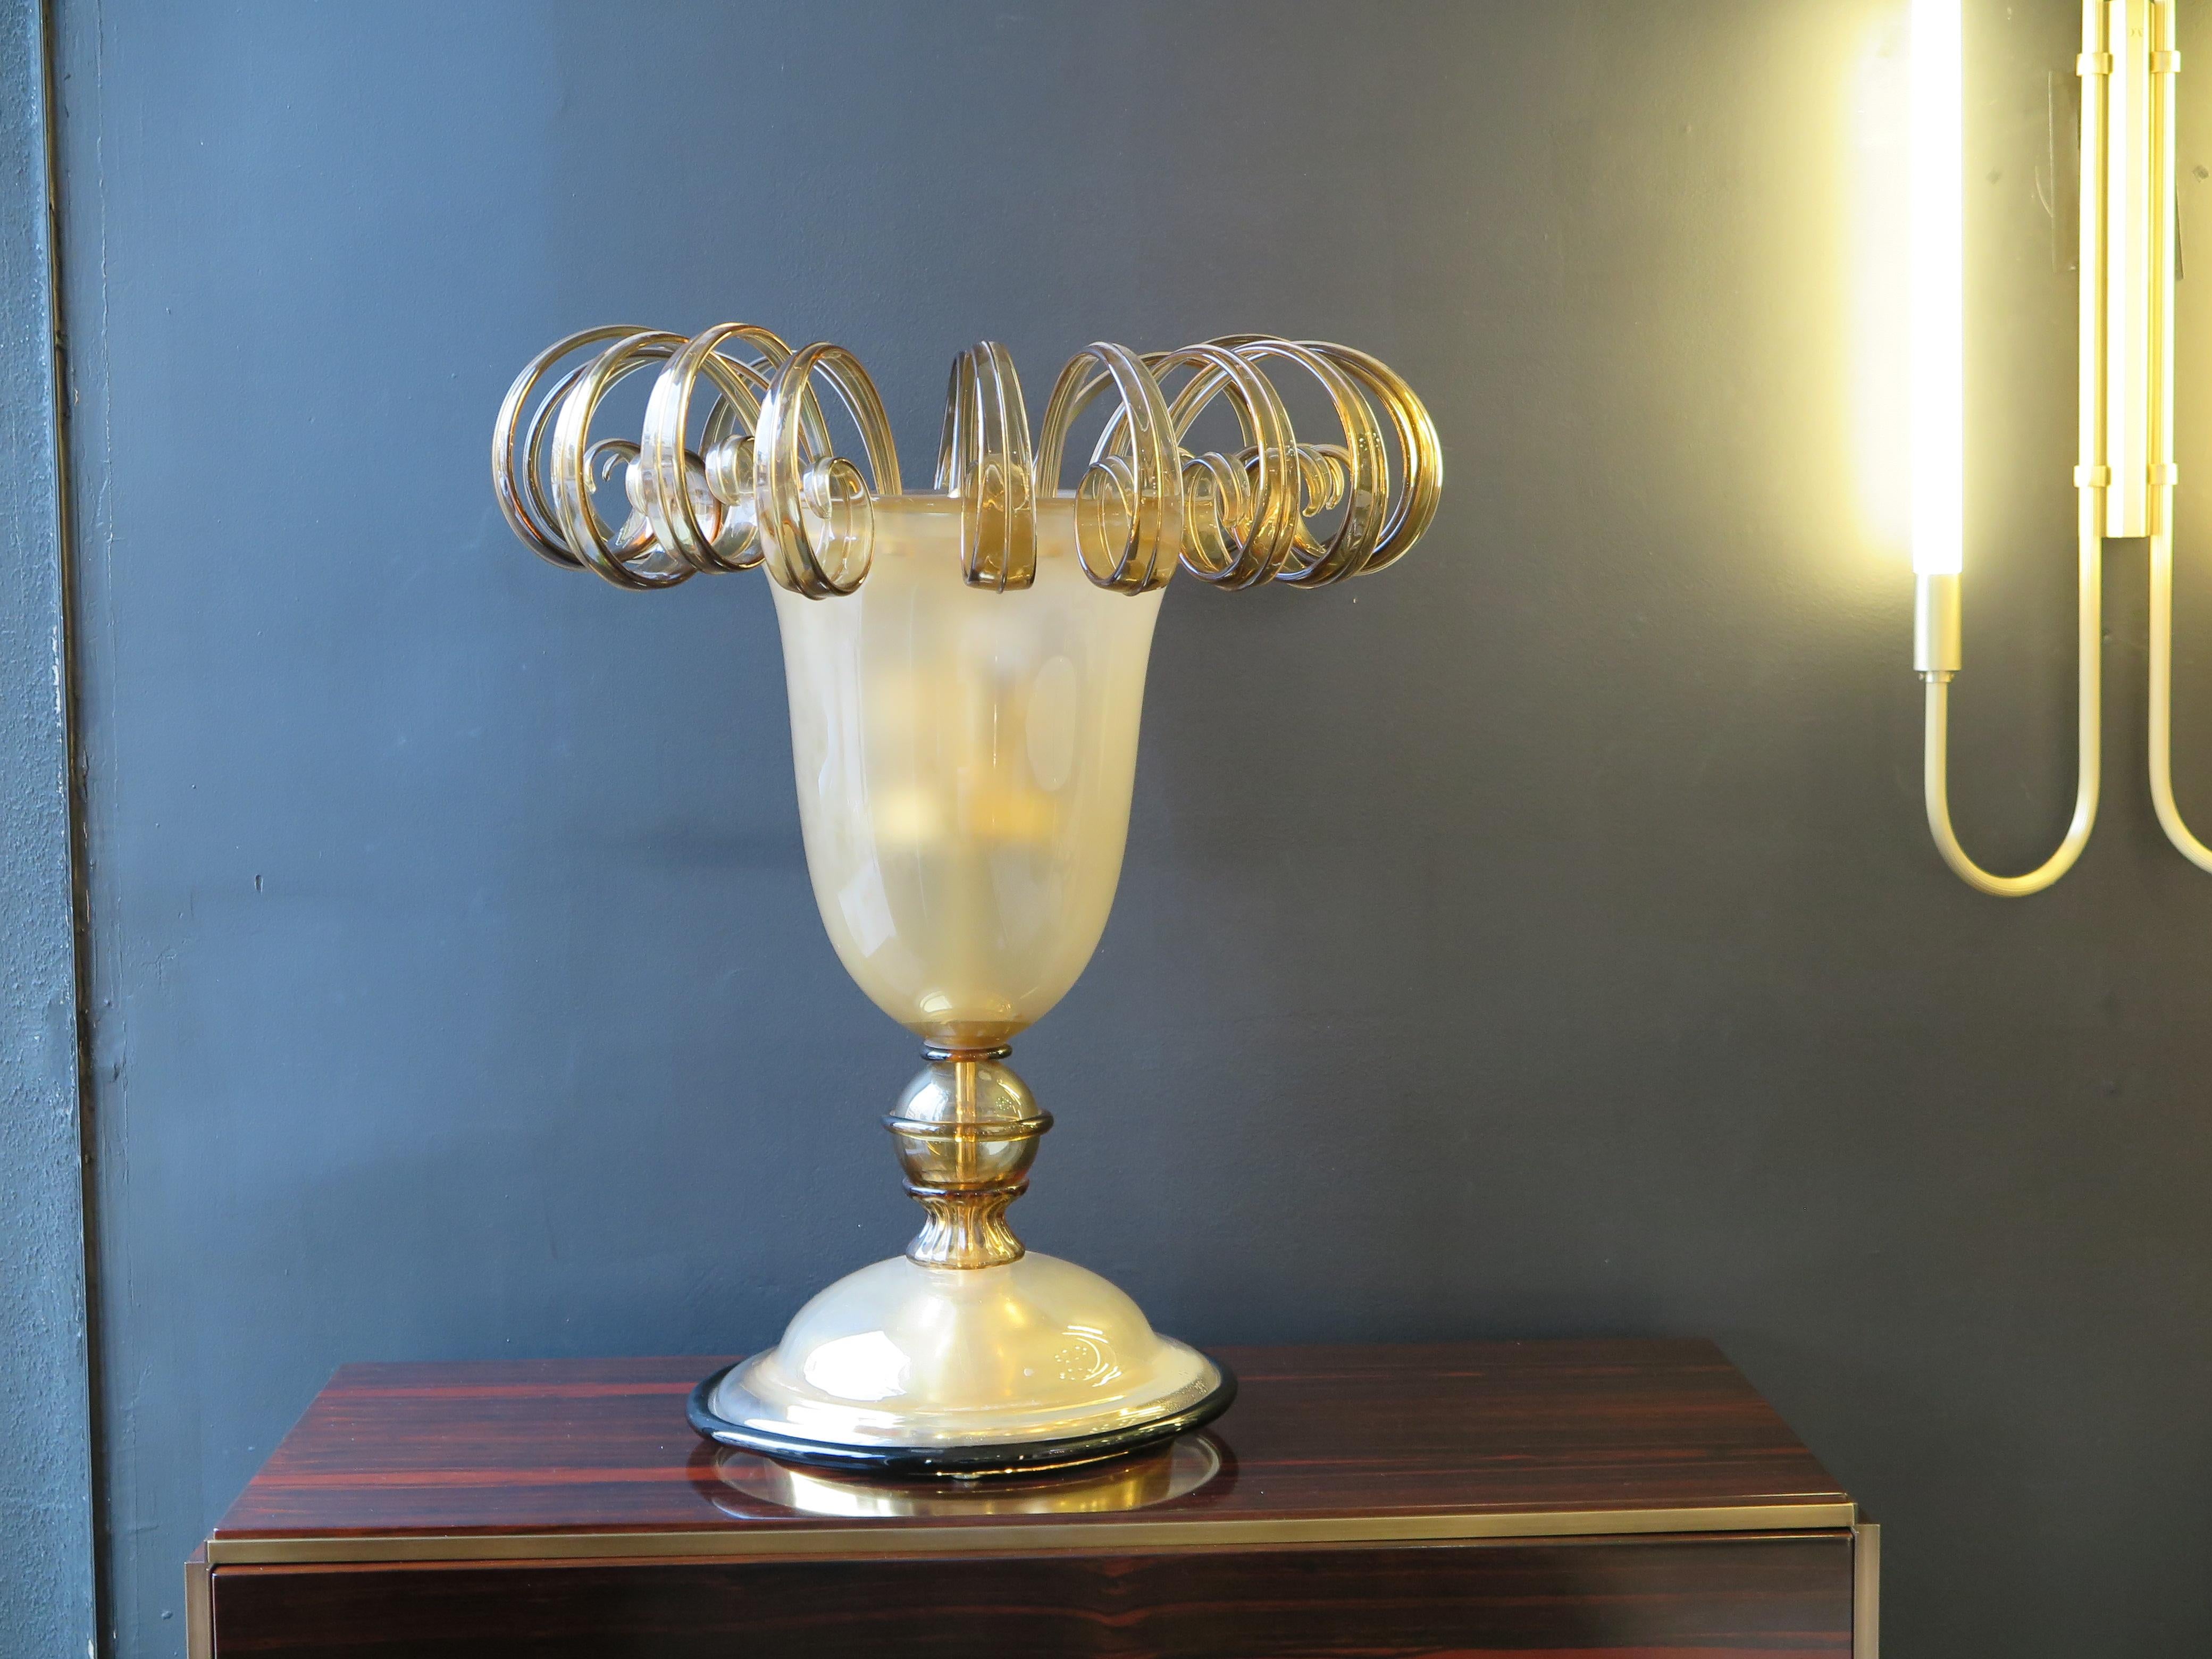 Large Italian Murano glass table lamp with 16 scroll details lining top rim in a translucent gold.  Tulip shaped lamp in gold speckled hue with black edging on base.  Three bulbs inside.
